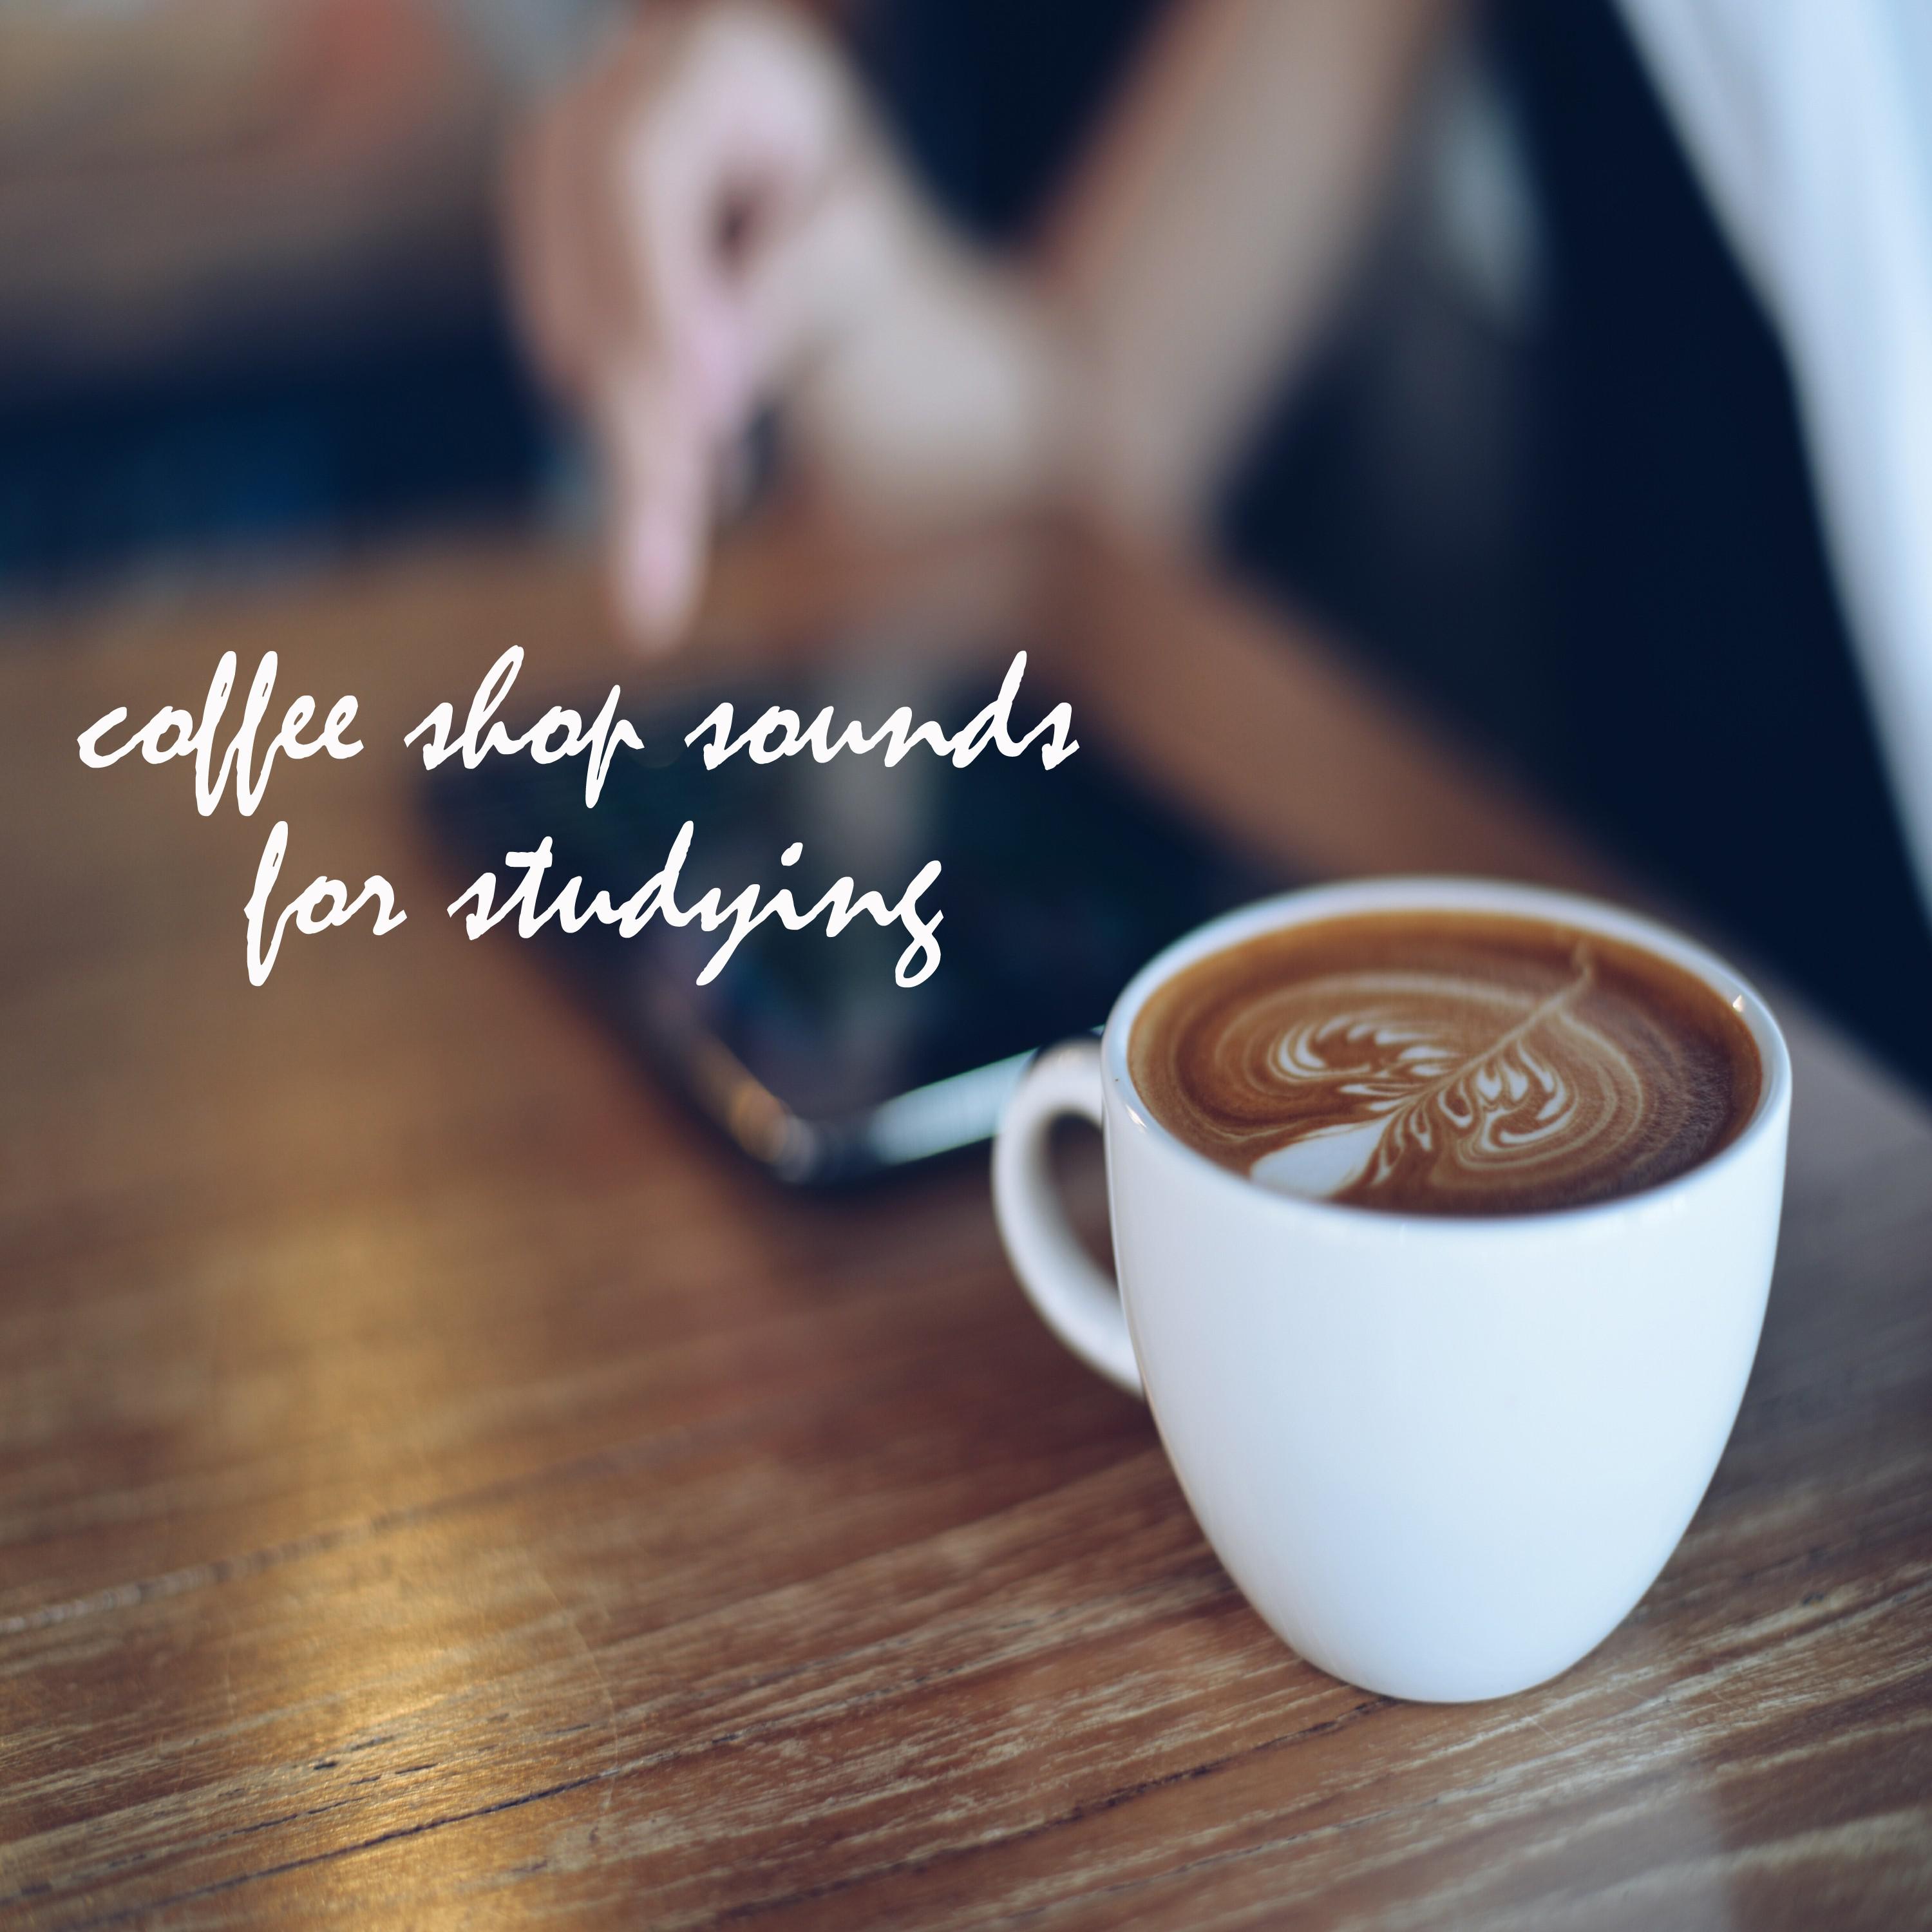 Coffee Shop Sounds for Studying and Working, Pt. 14